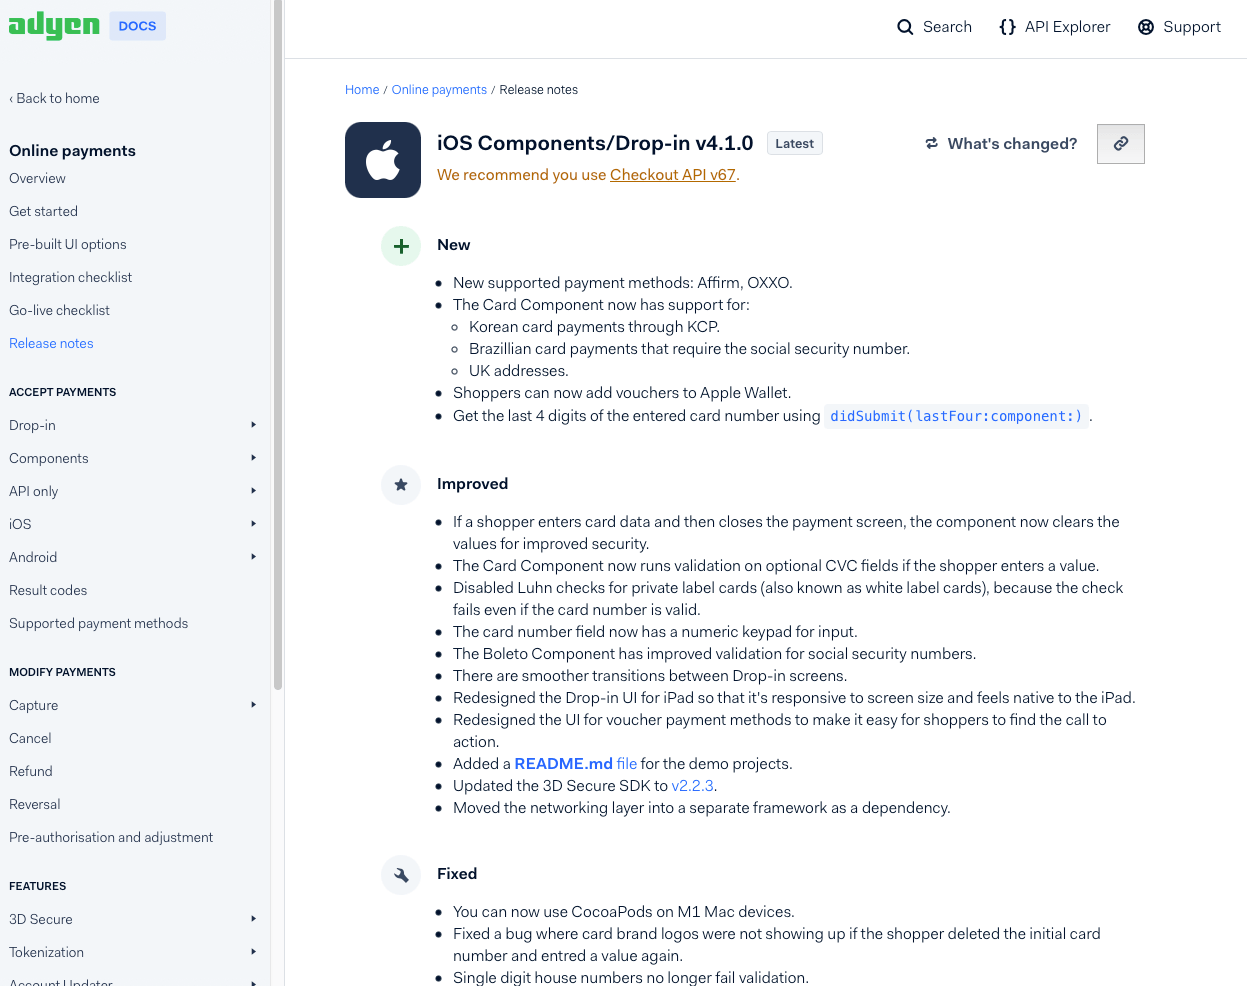 Release notes in the form of lists